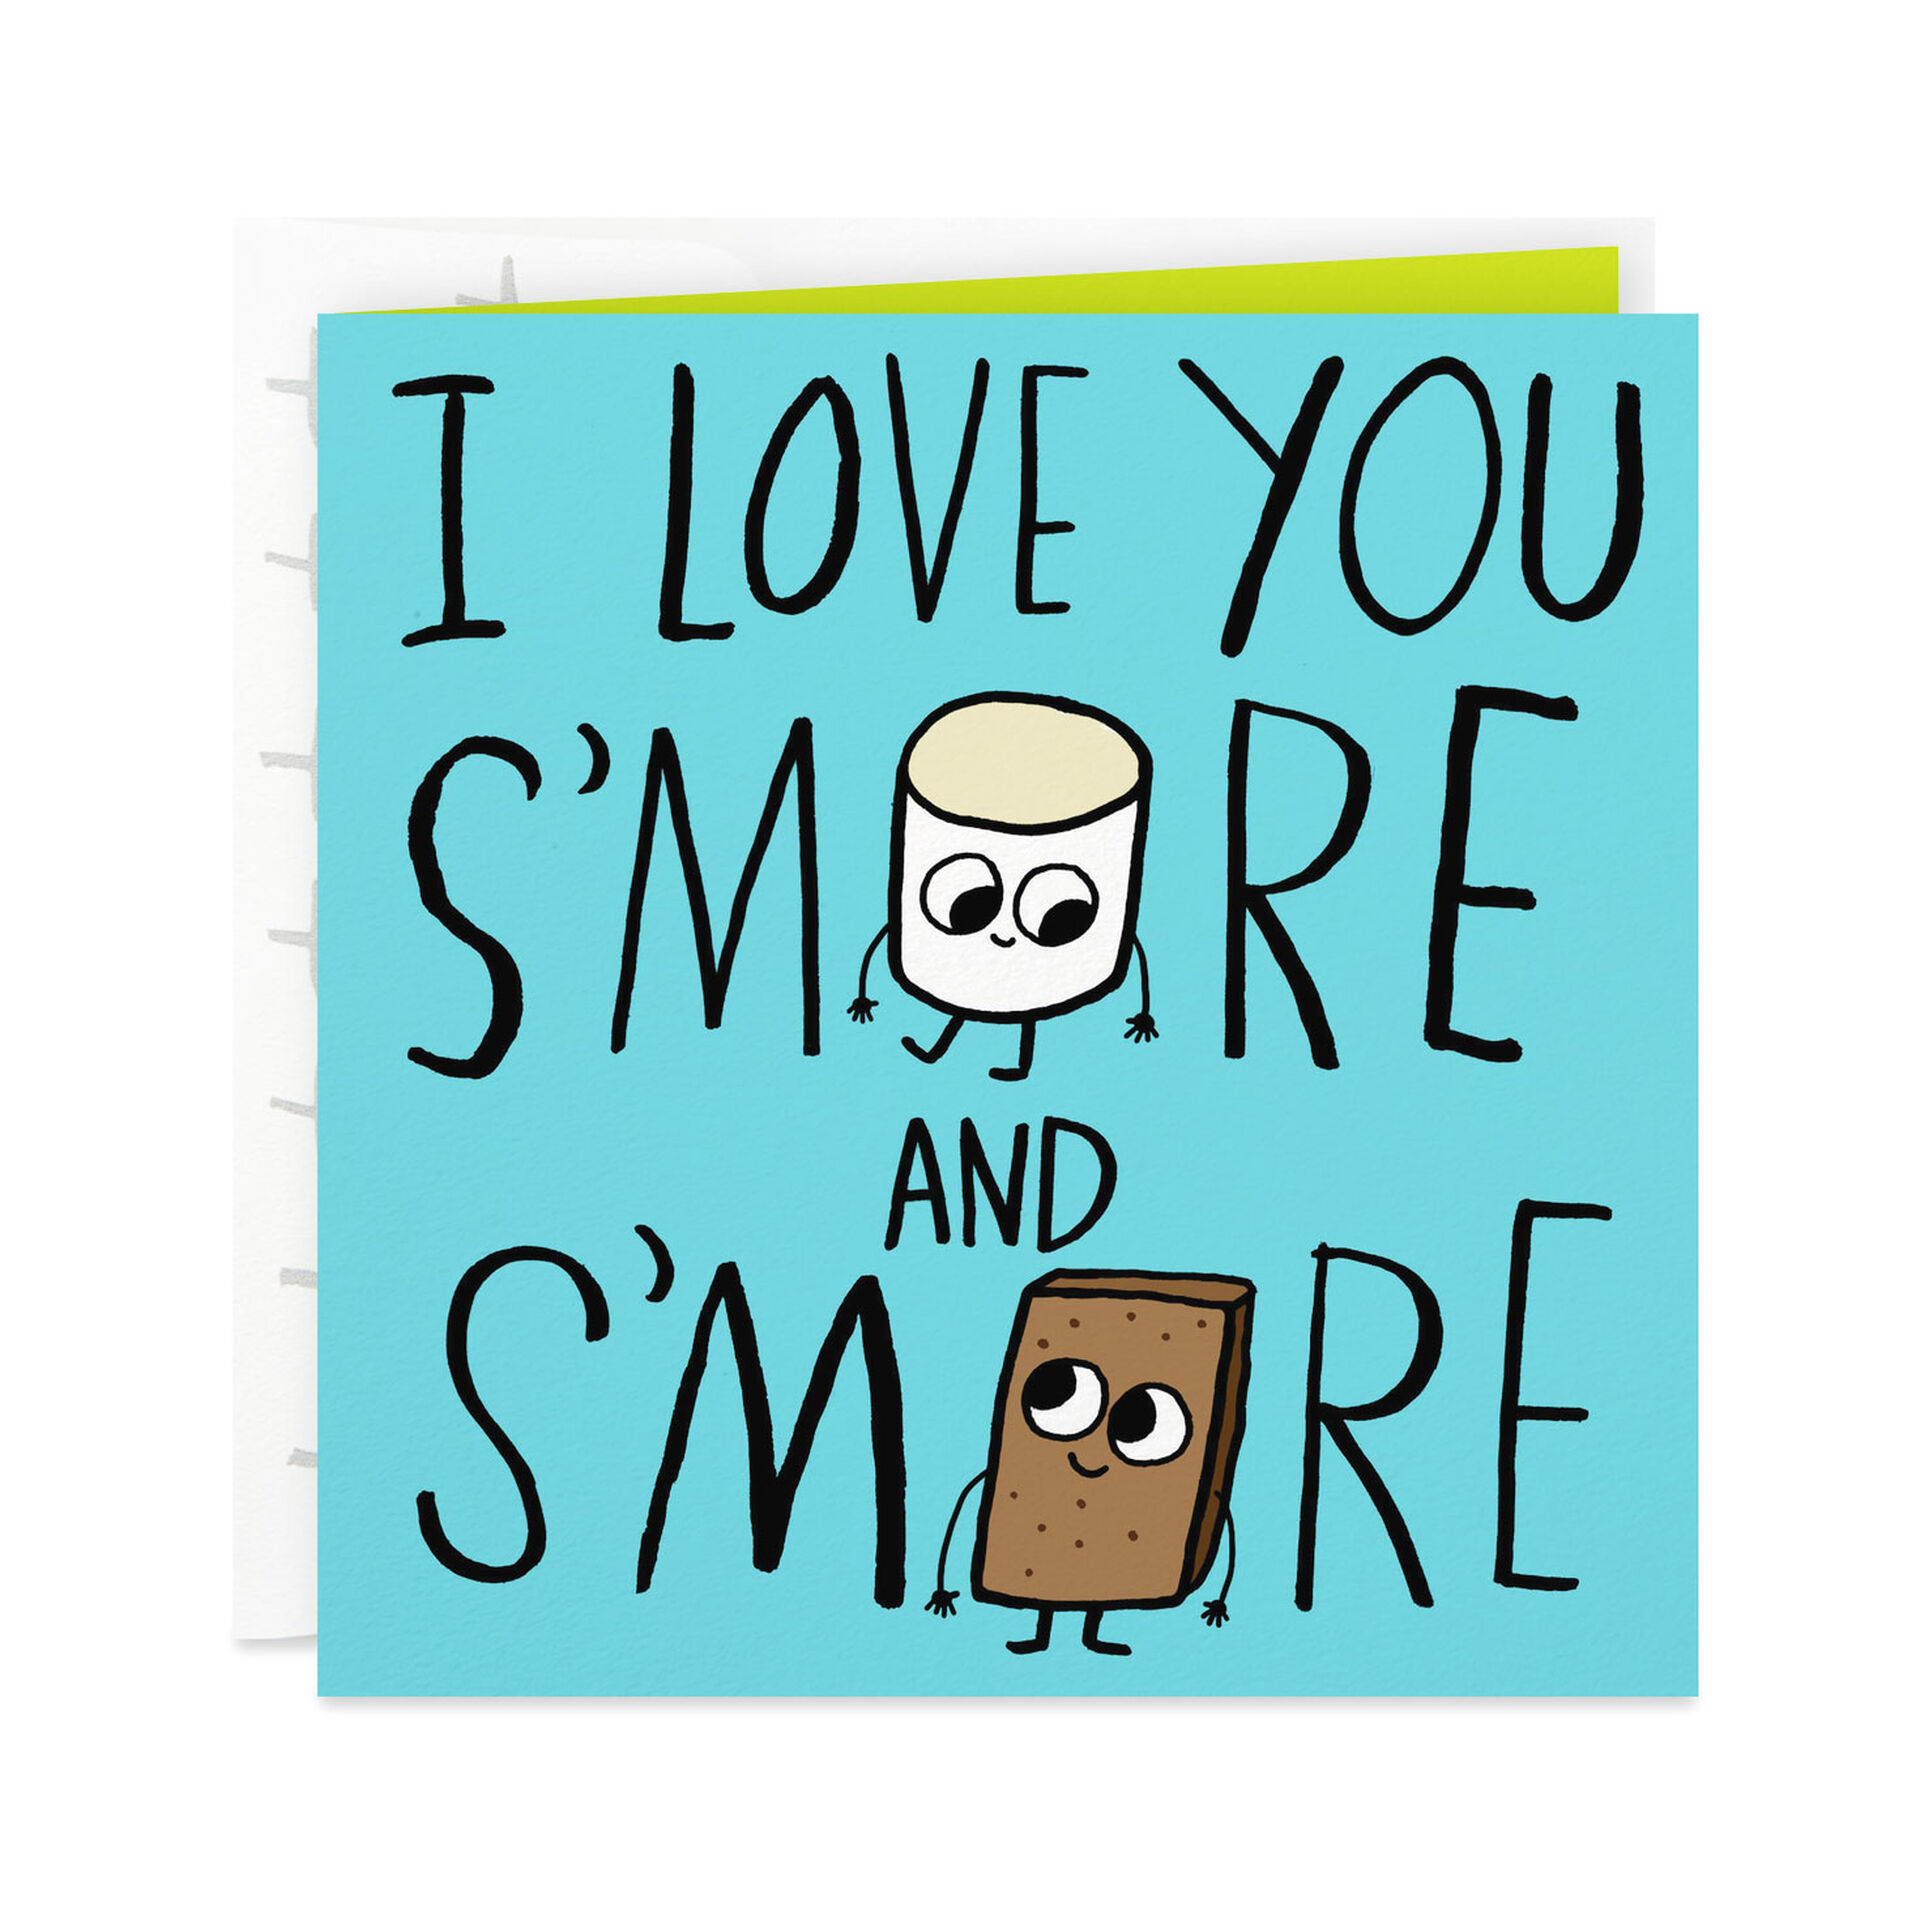 Marshmallow-and-Chocolate-Smores-Anniversary-Card_359YYS1445_01